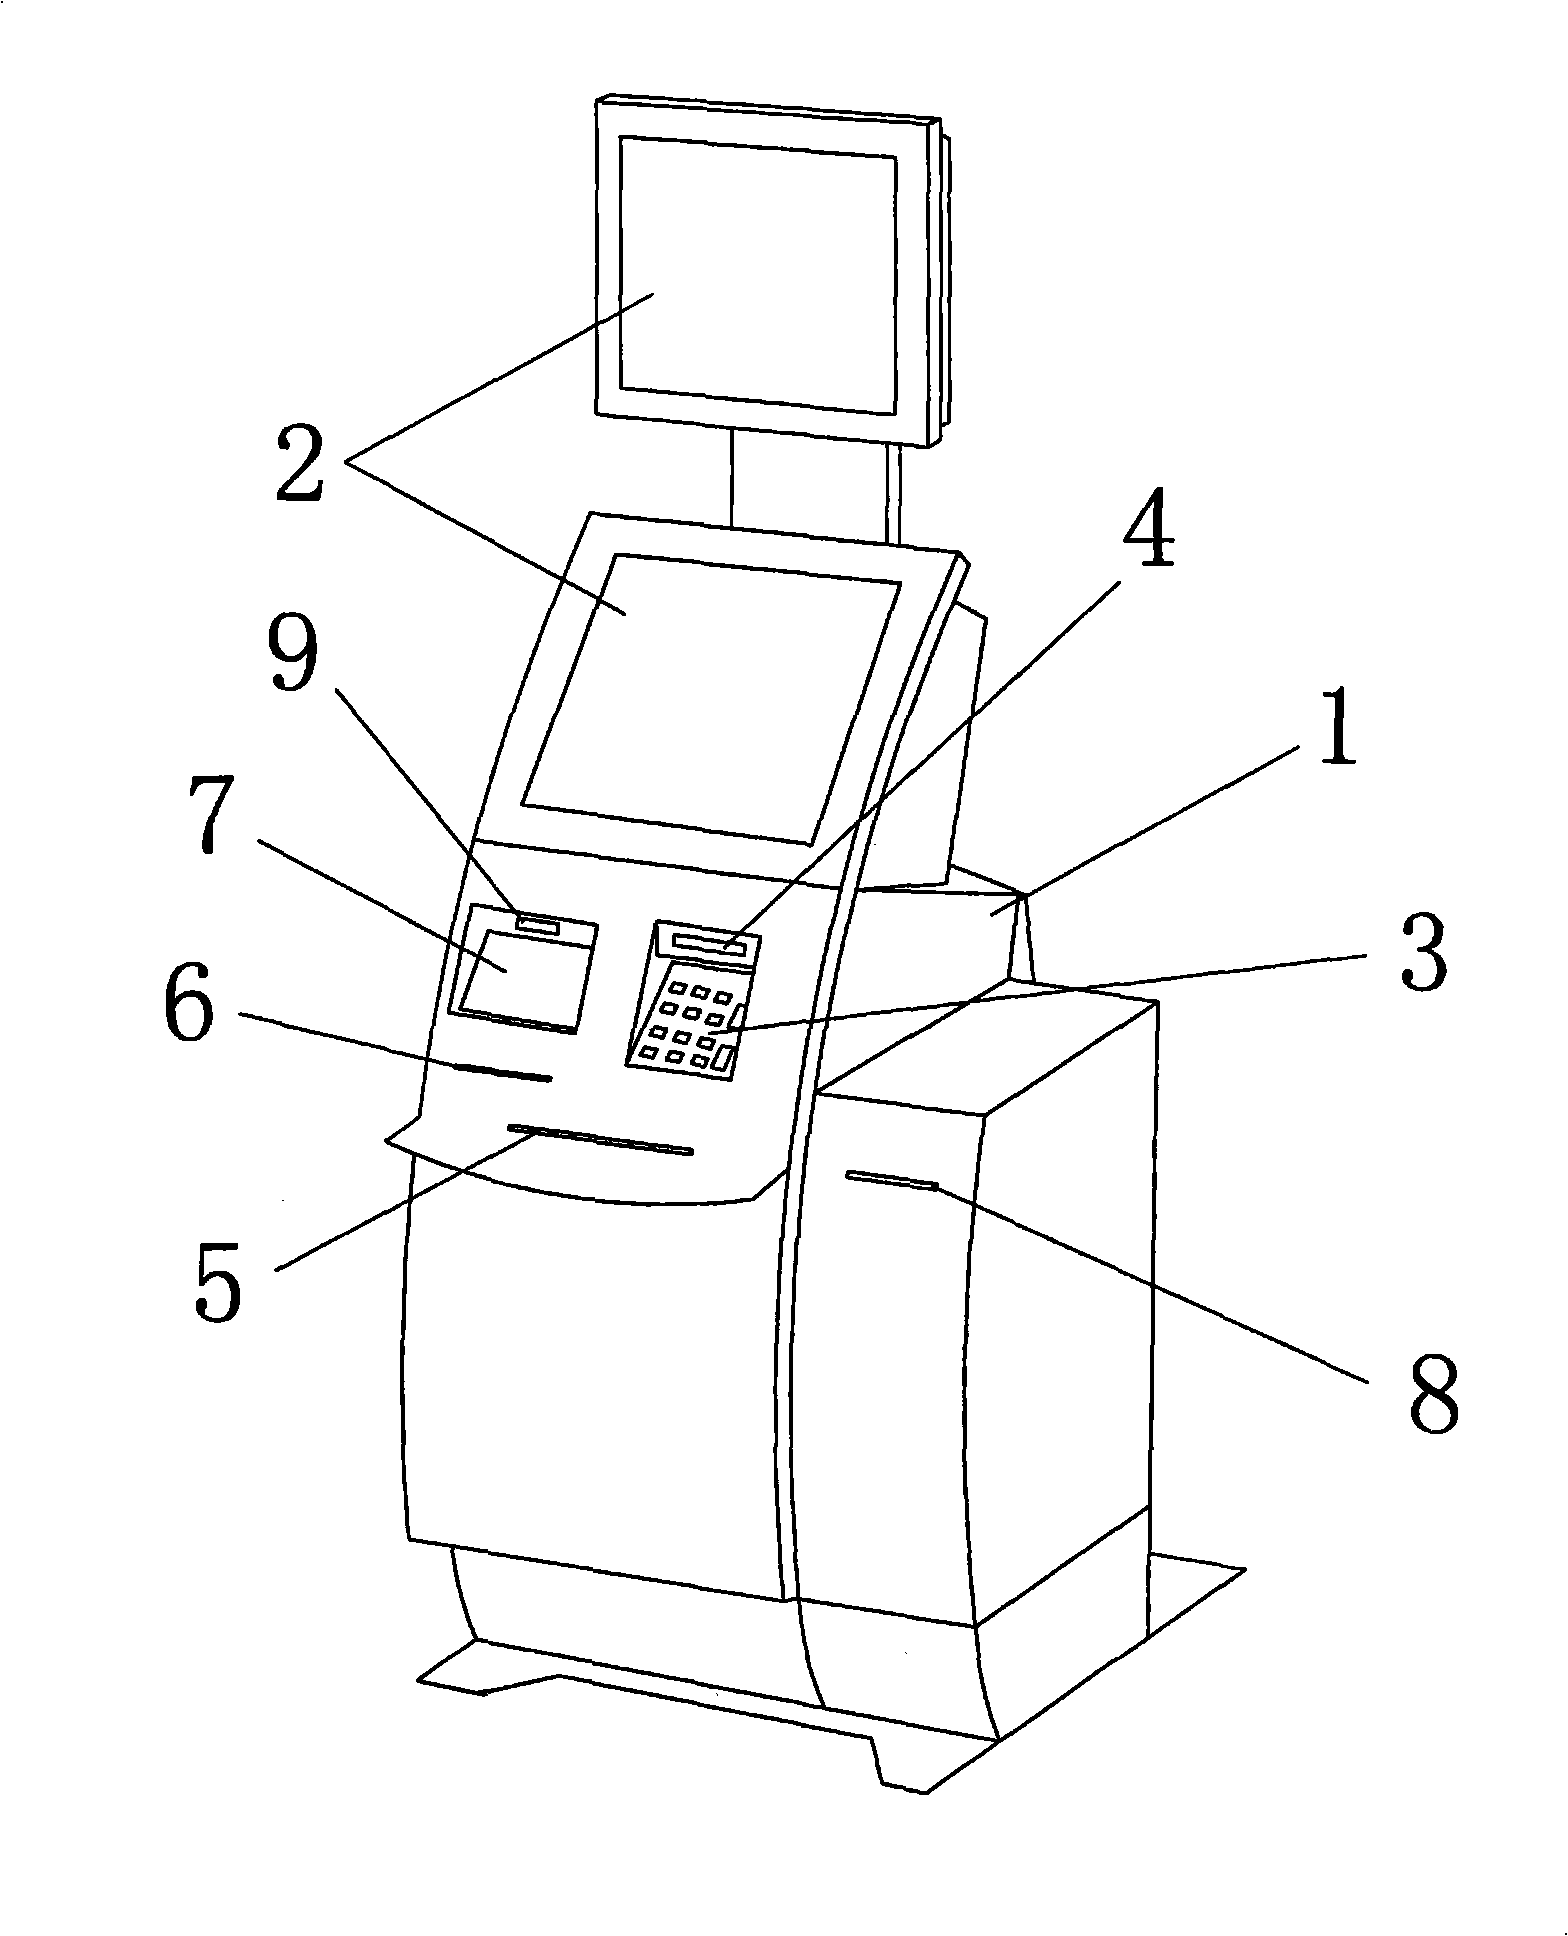 Ticket information service system and its accomplishing method